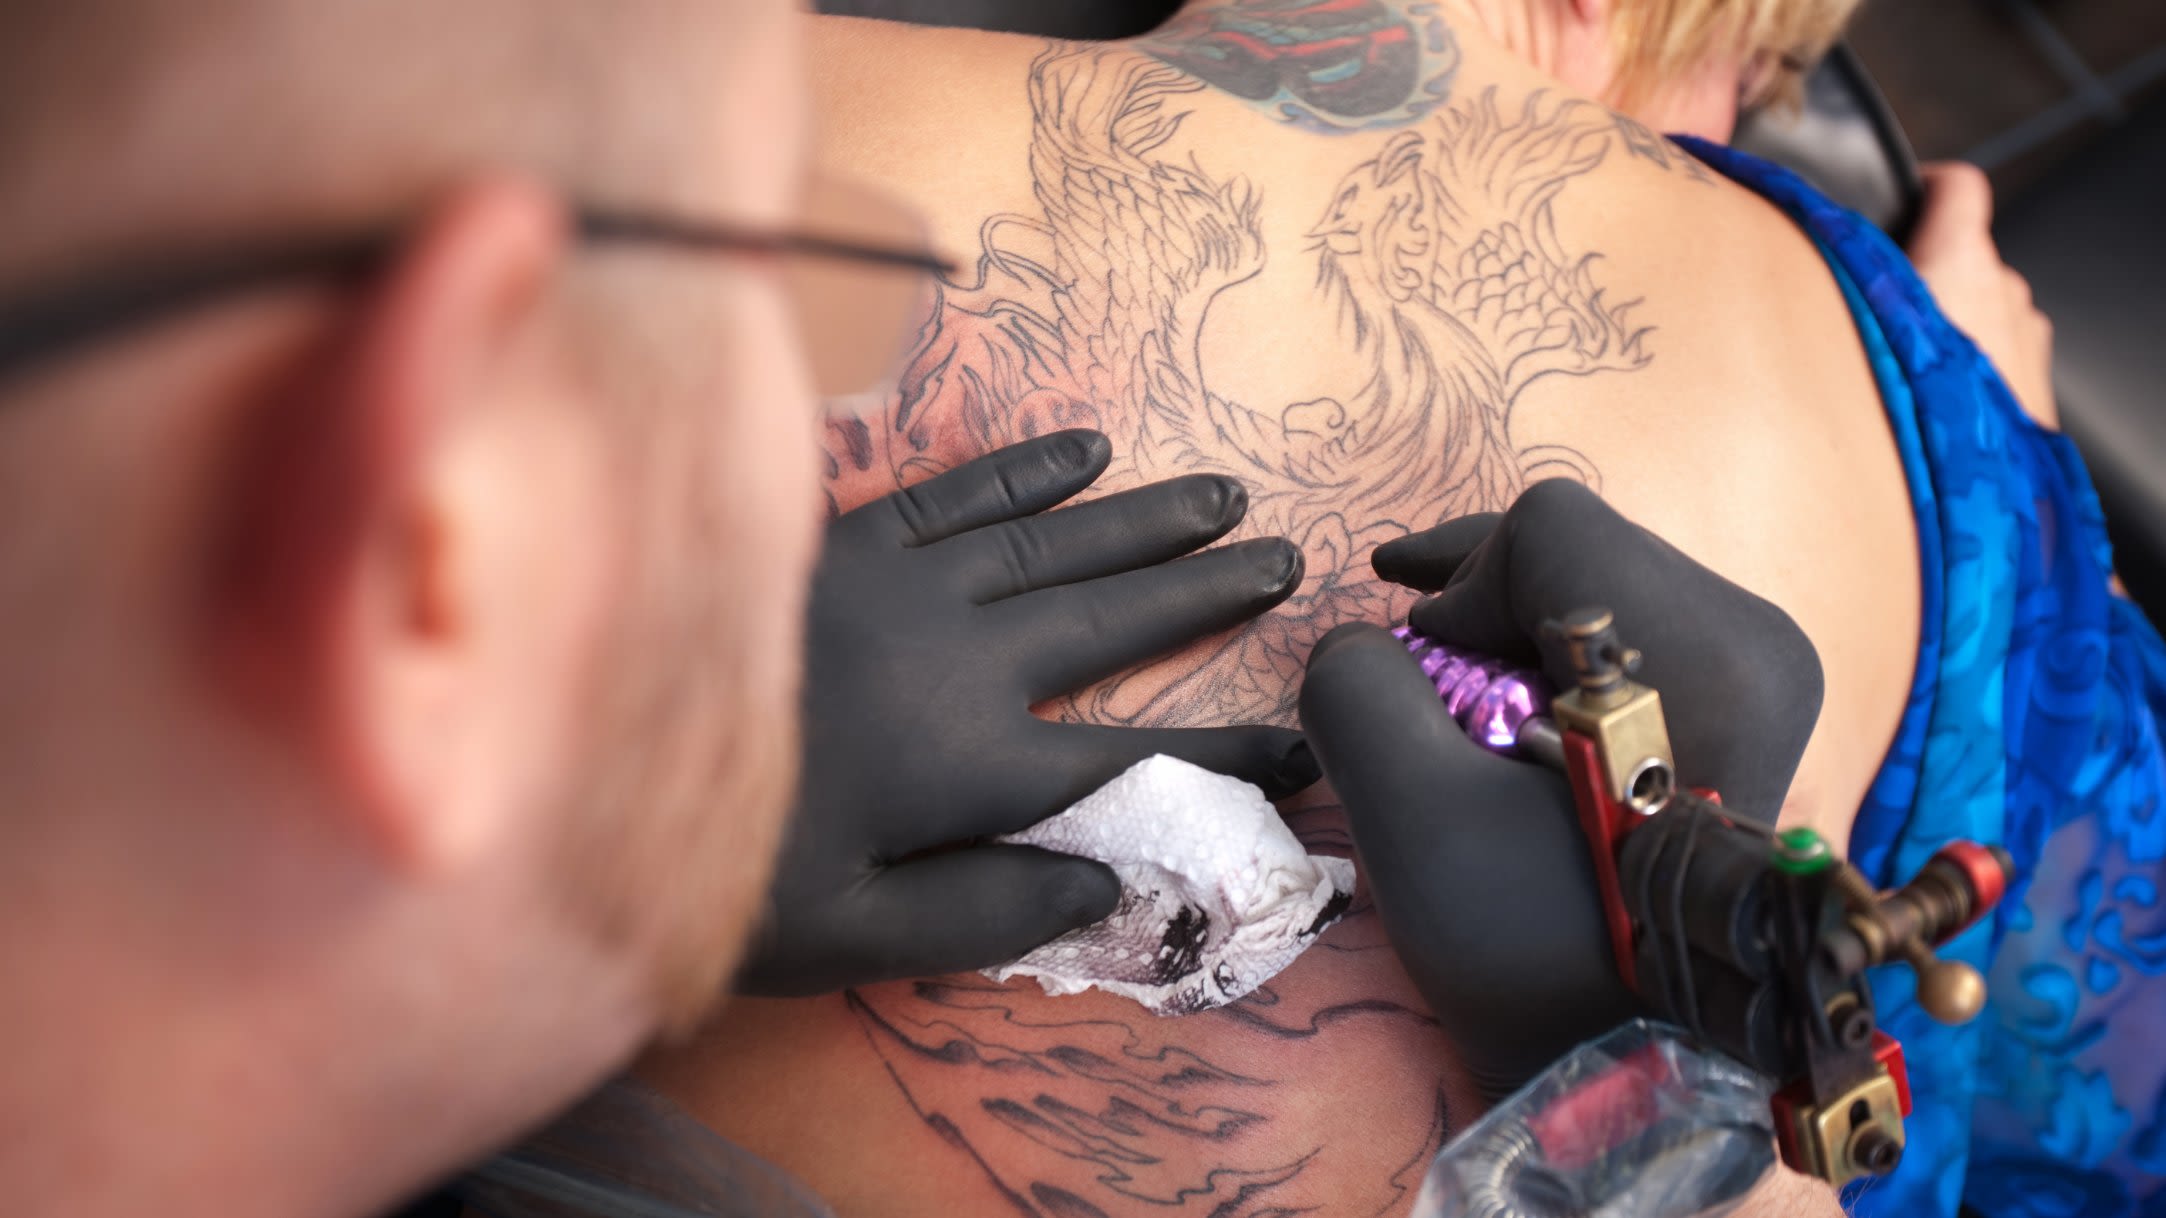 Tattoos last, but for 1 out of 10, so does the pain | CNN